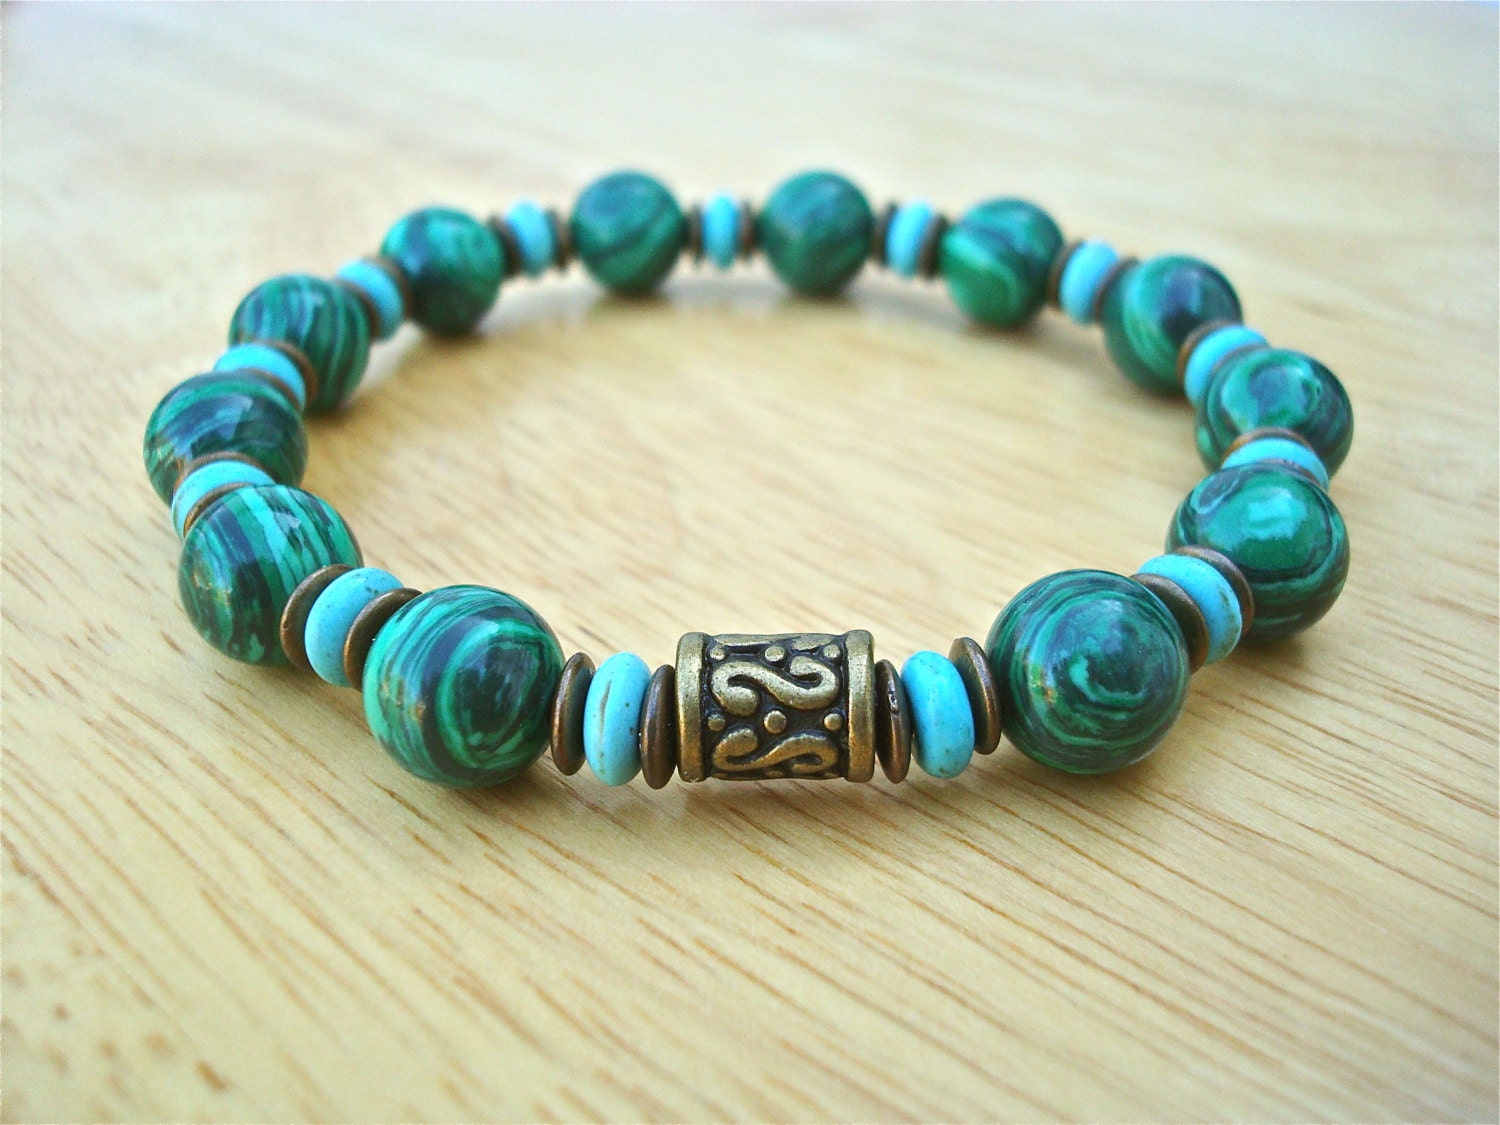 Men's Spiritual Healing and Protection Bracelet with Semi